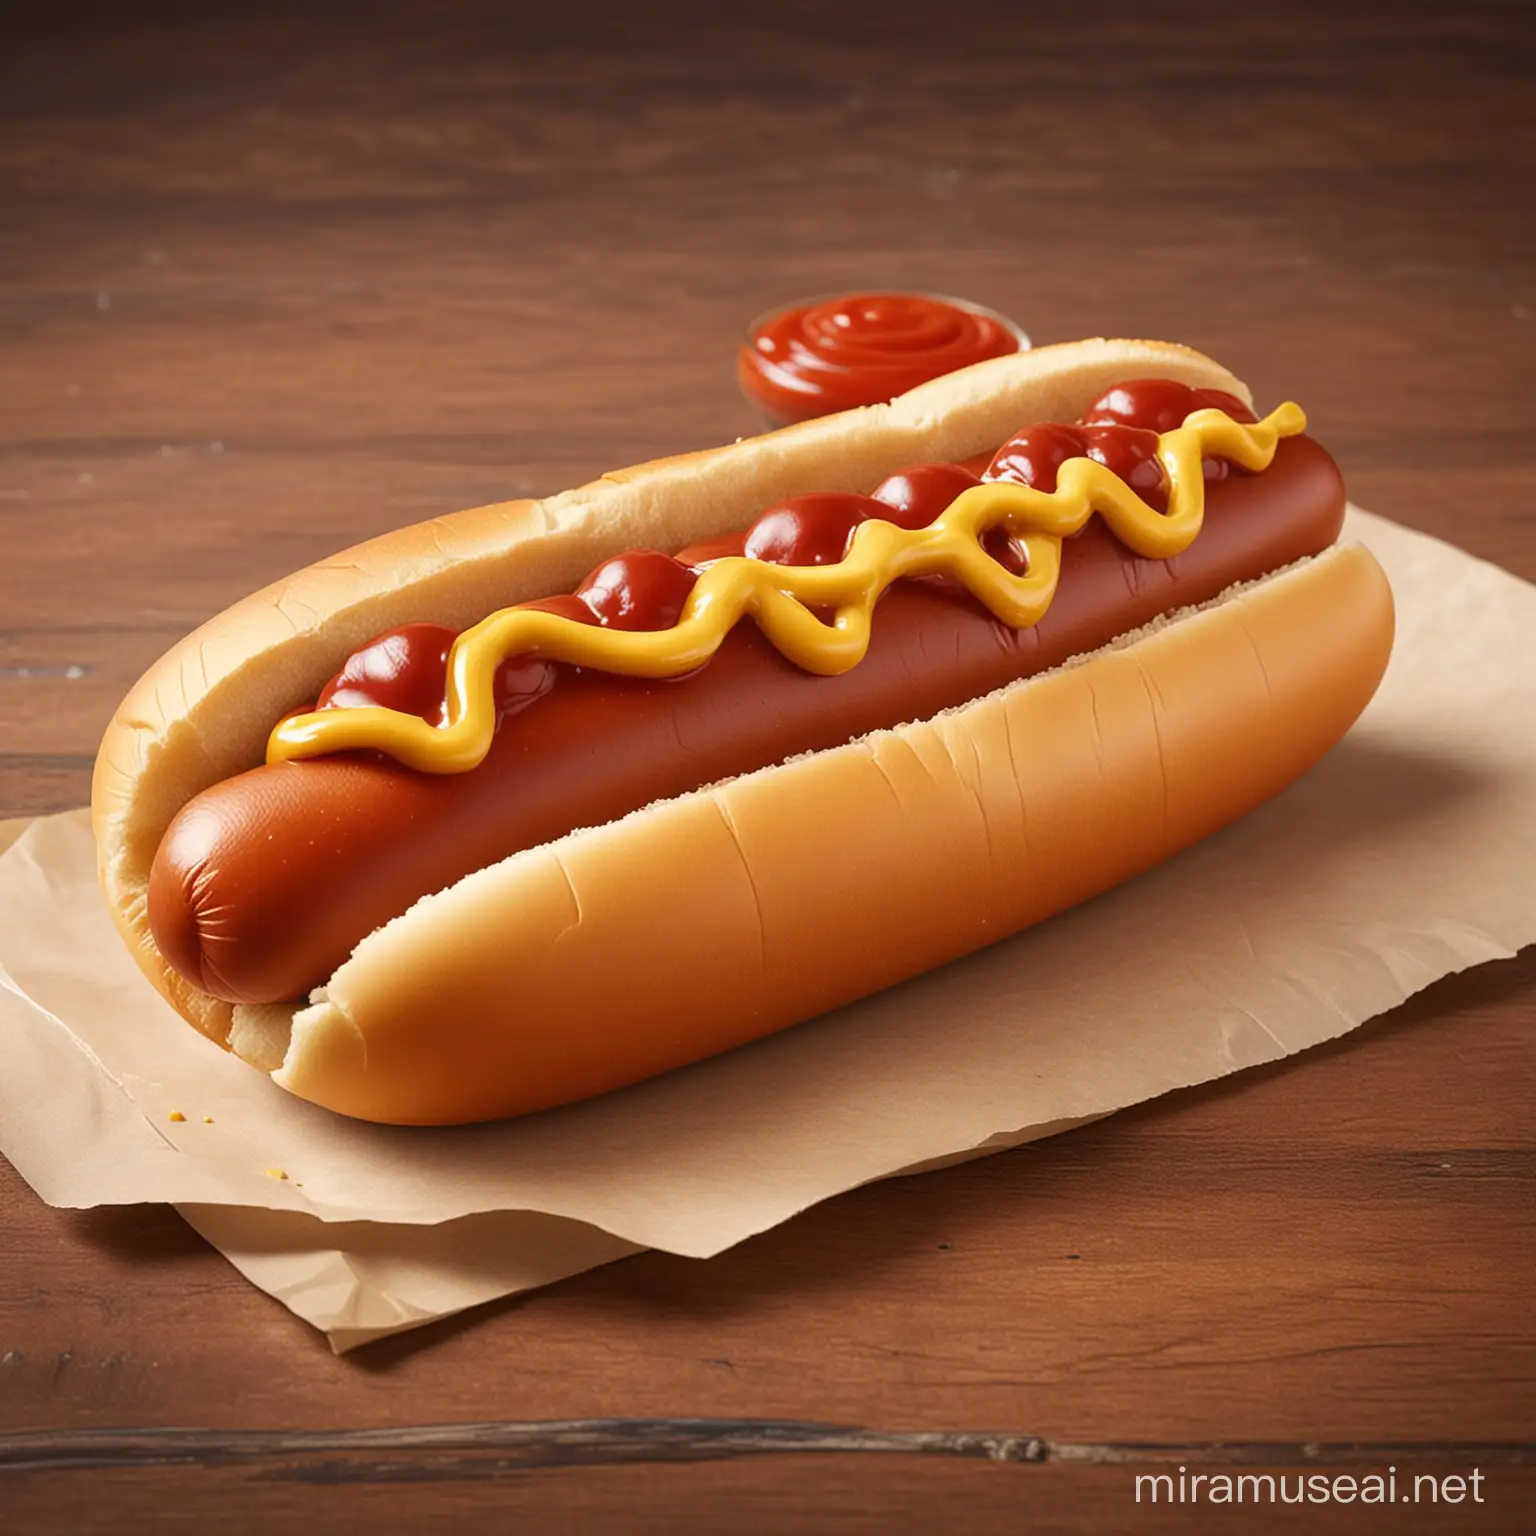 Delicious Hot Dog with Red Ketchup Disney Pixar Style